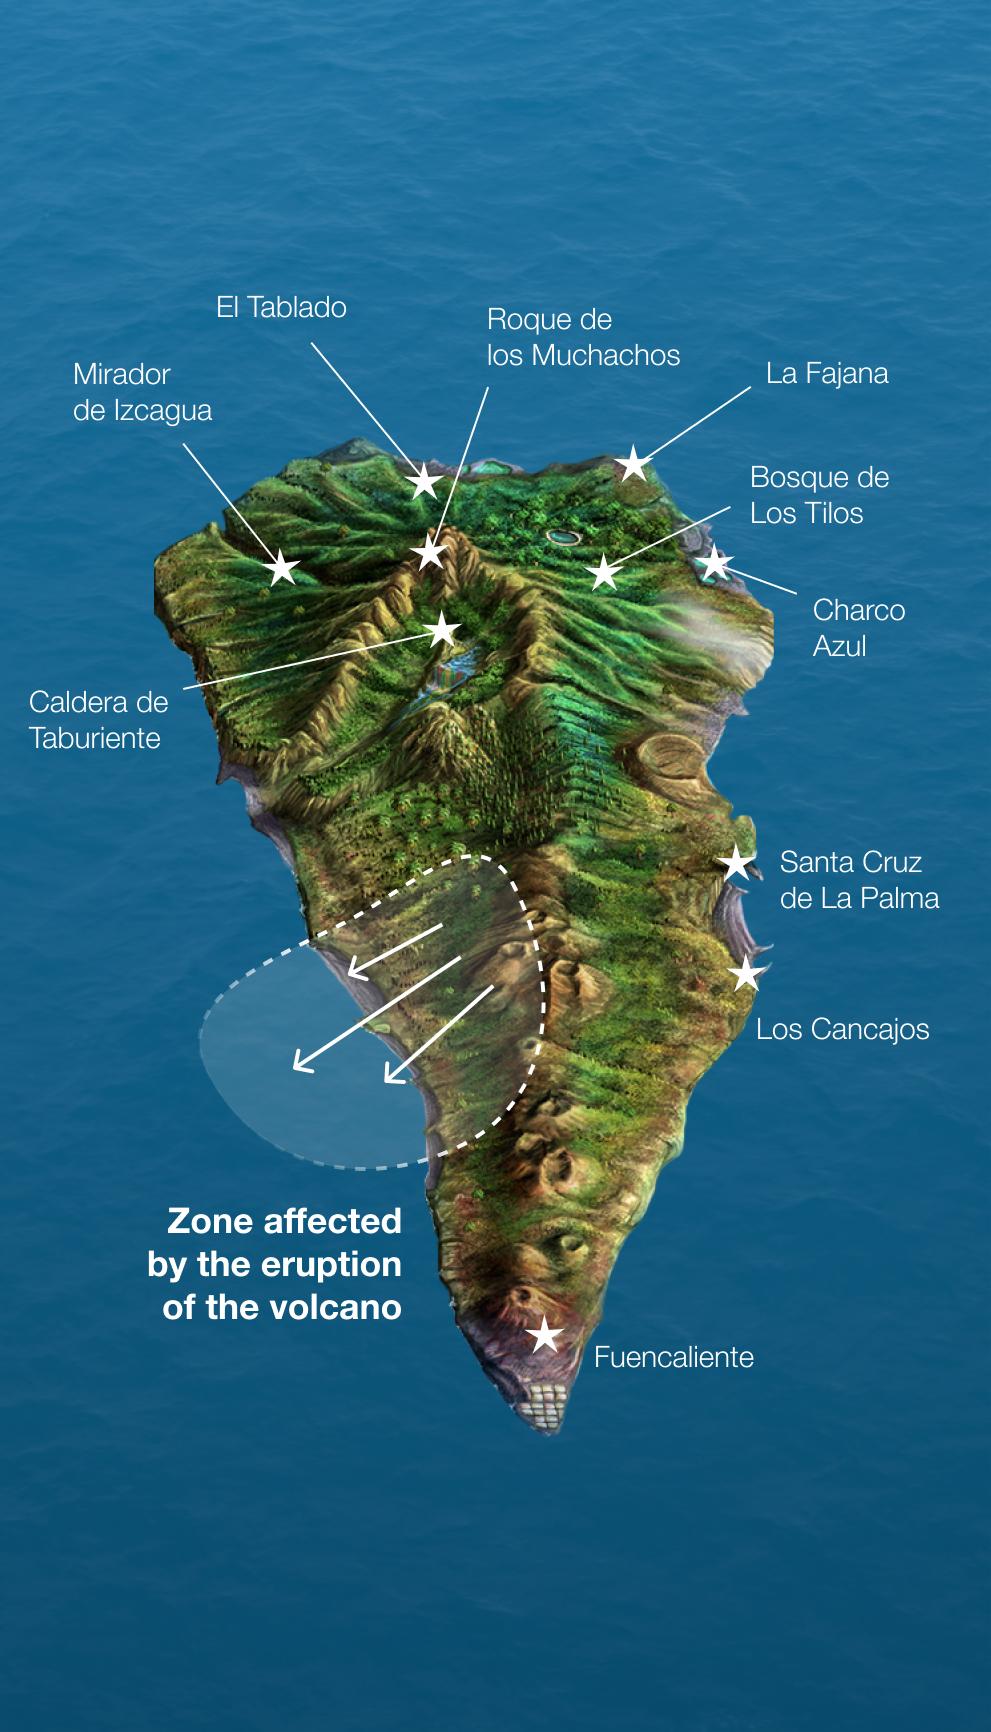 Accessible areas of interest and impact, island of La Palma